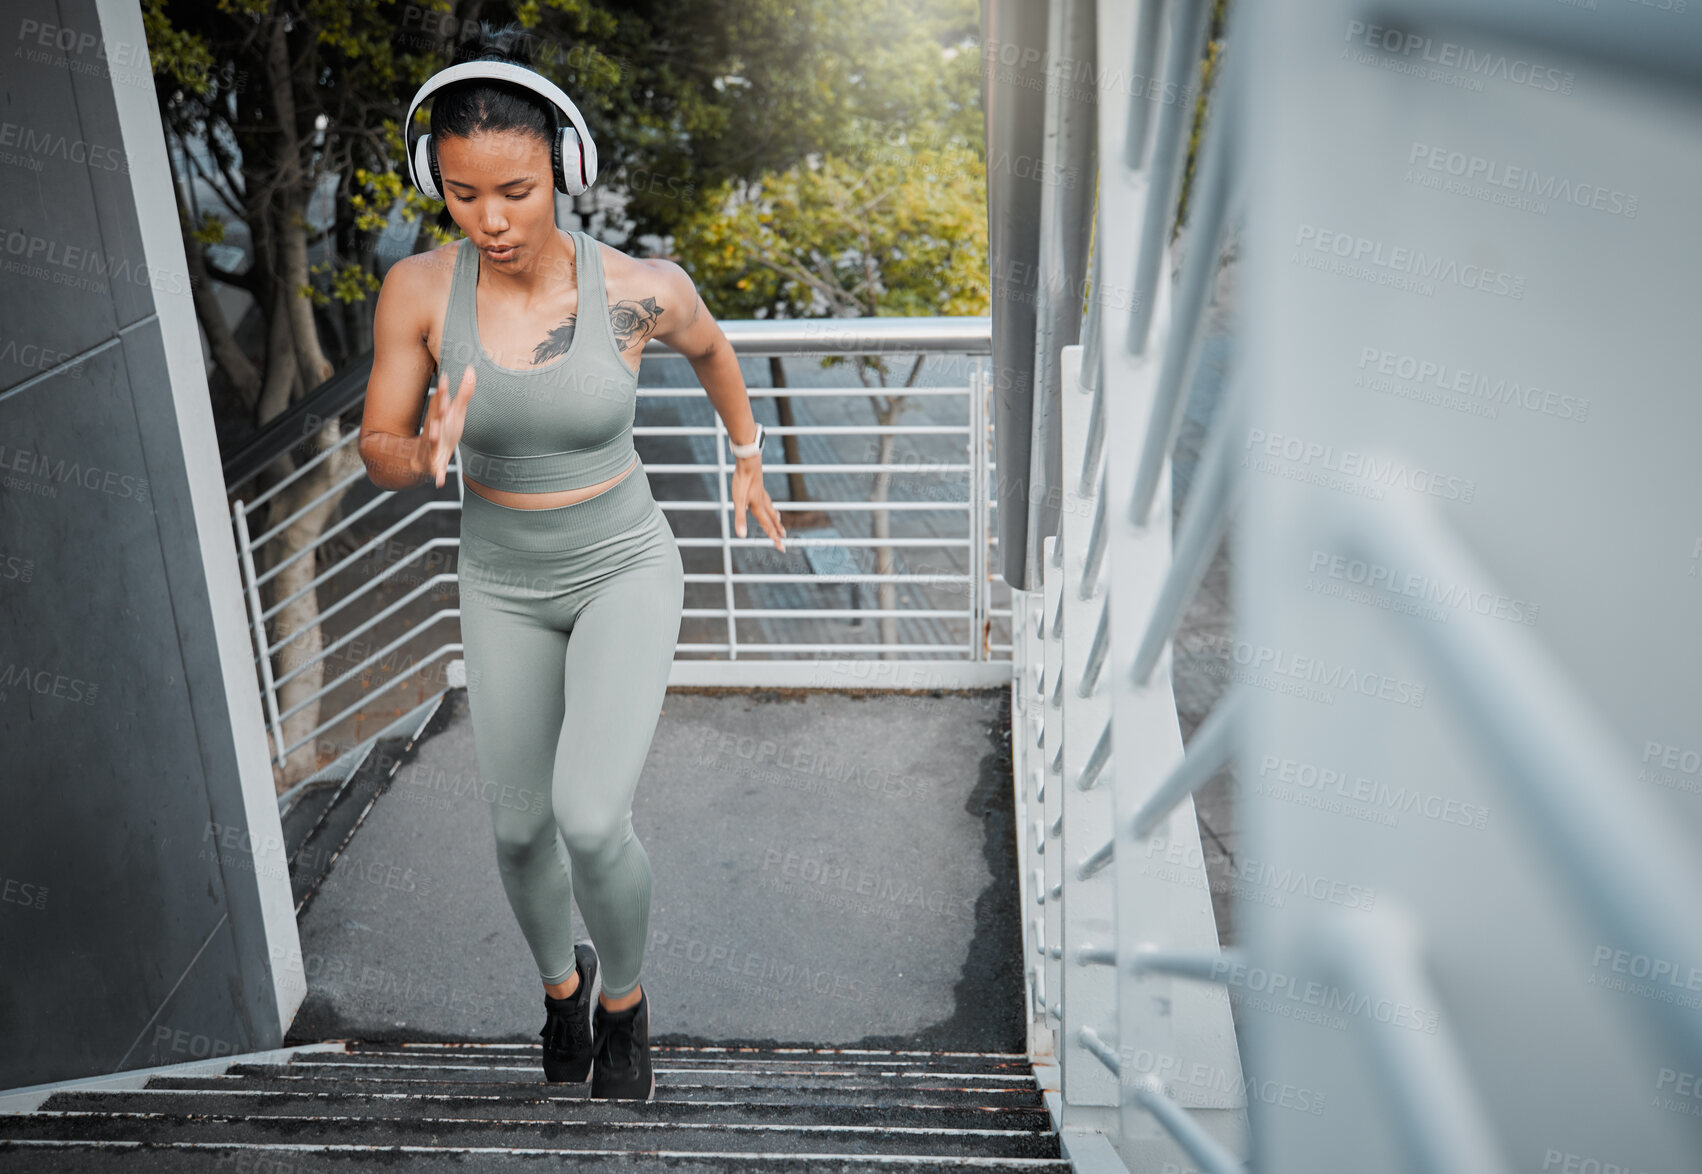 Buy stock photo Young fit athletic mixed race woman running up stairs during outdoor workout in city while listening to music through headphones. Hispanic woman focused on health, physical activity, strength, cardio